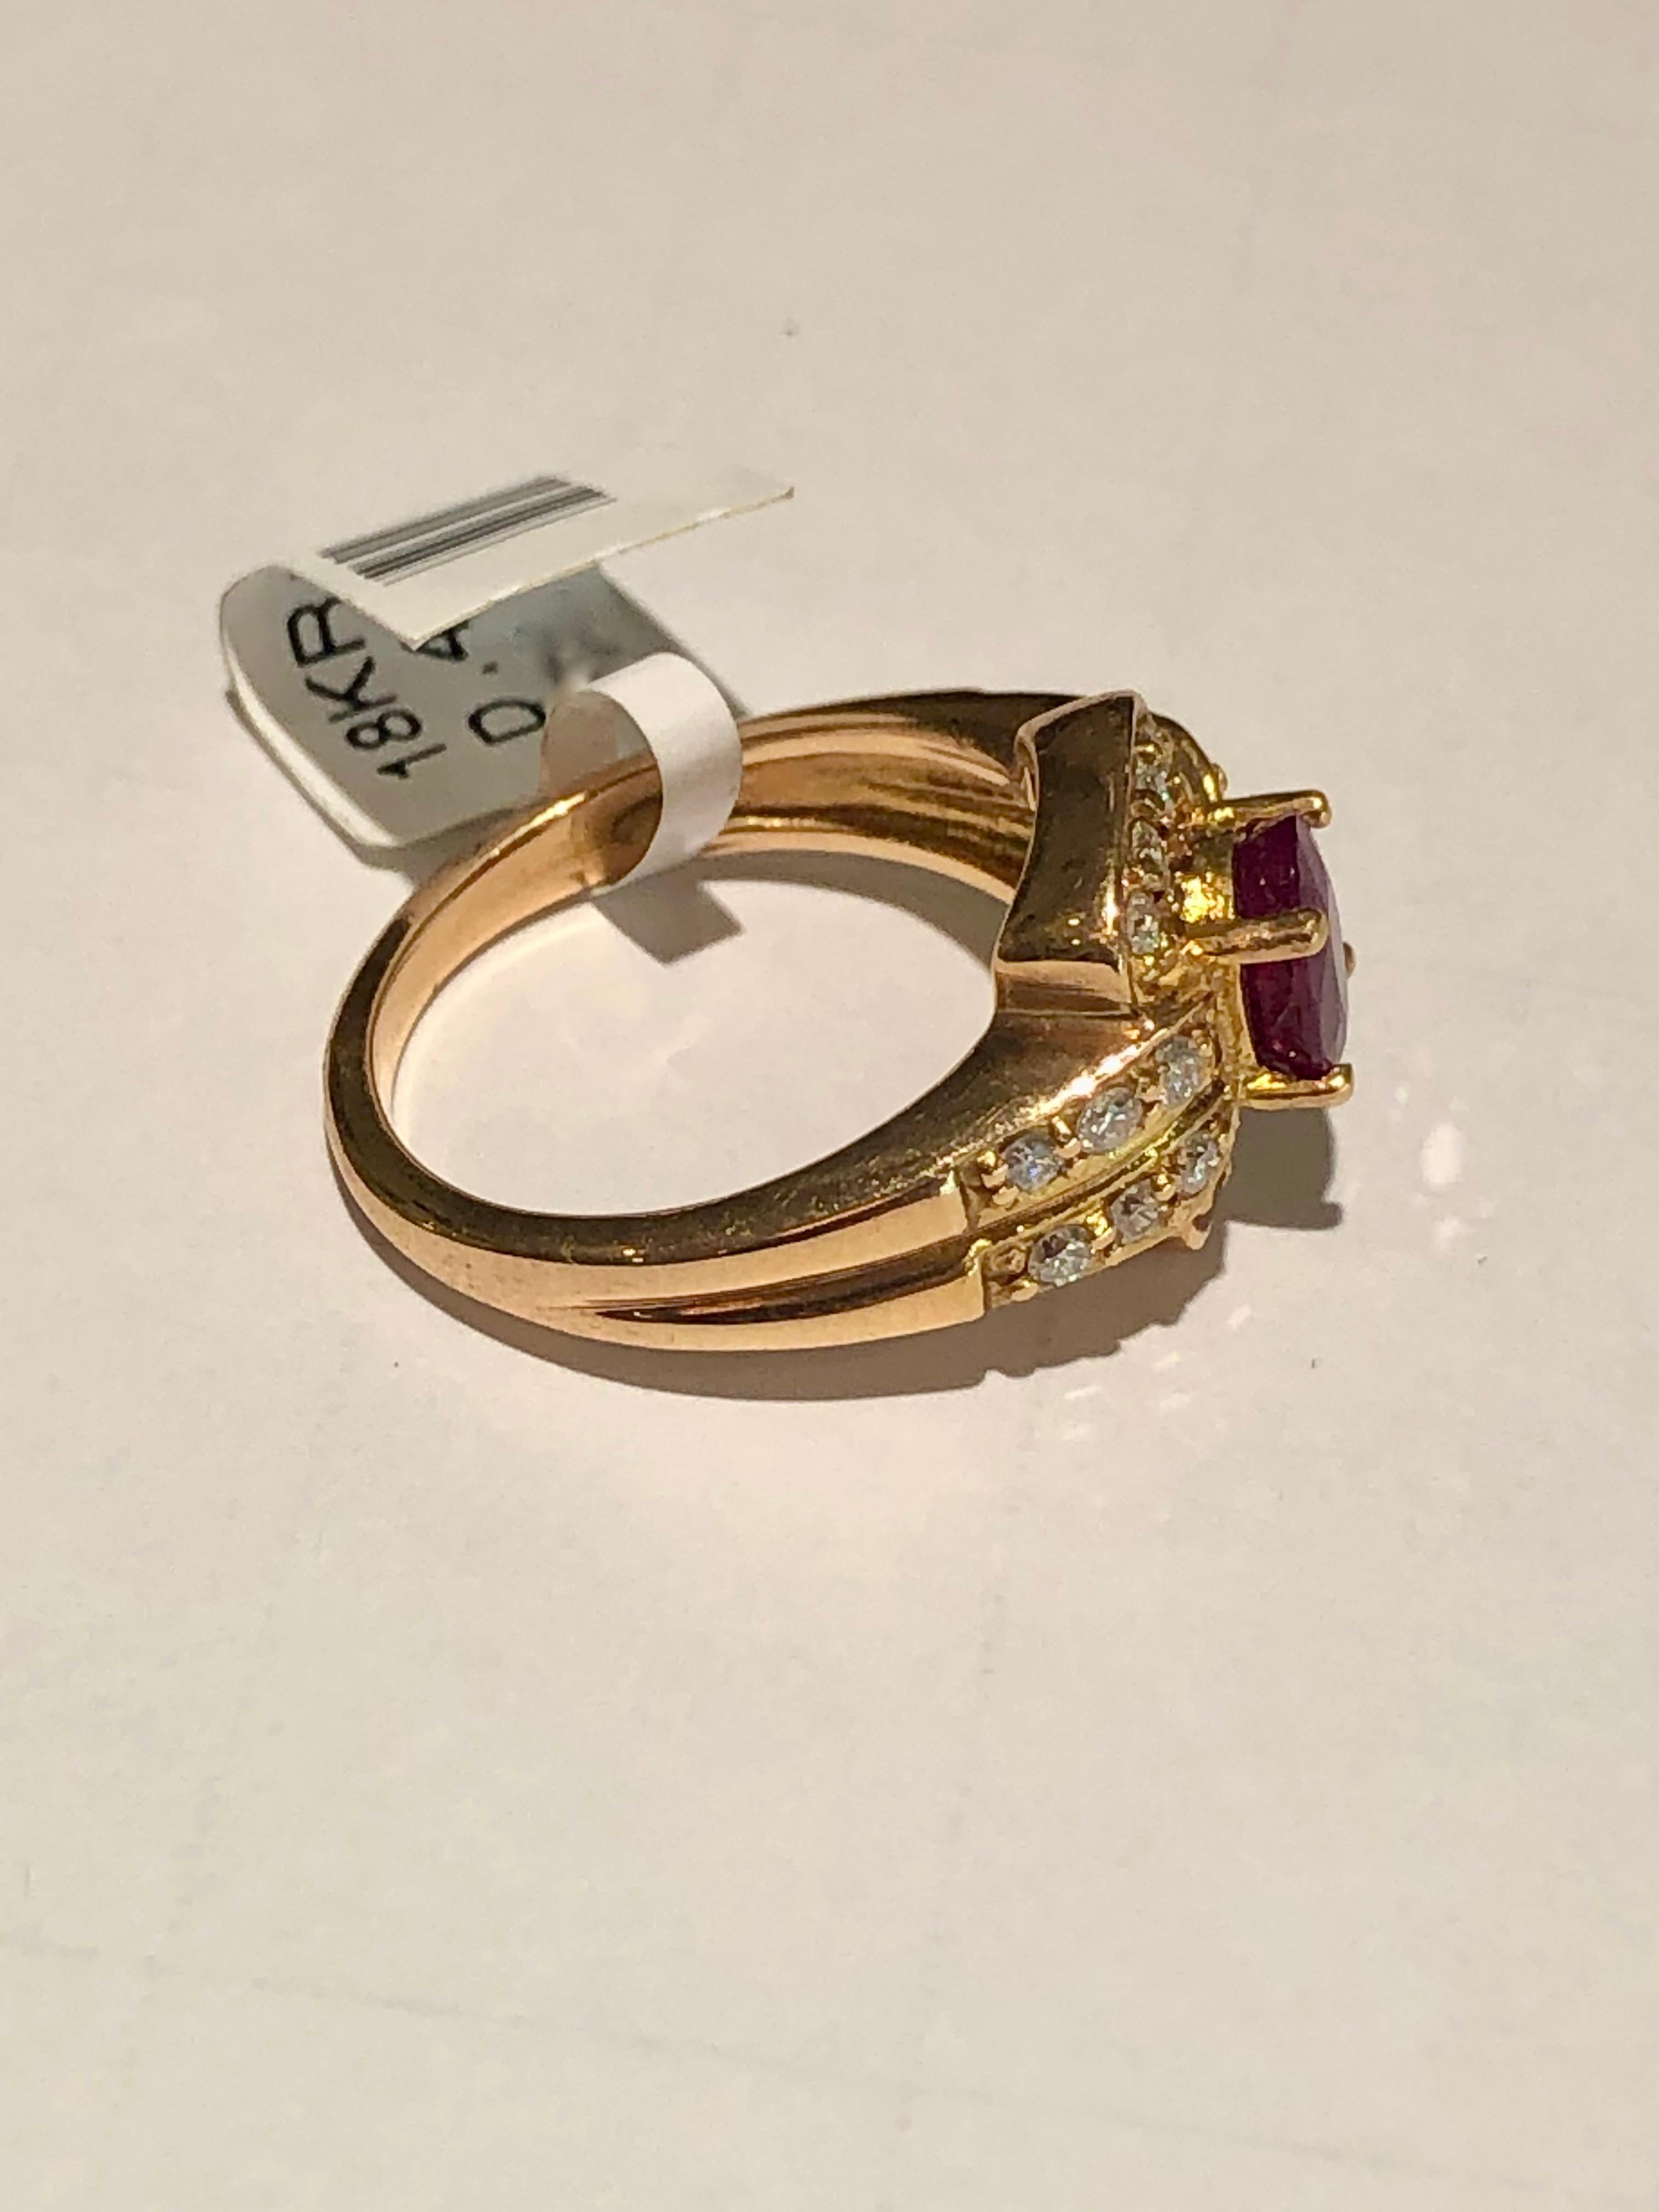 Vivid Red Ruby and Diamonds Ring 18 Karat Gold For Sale 1